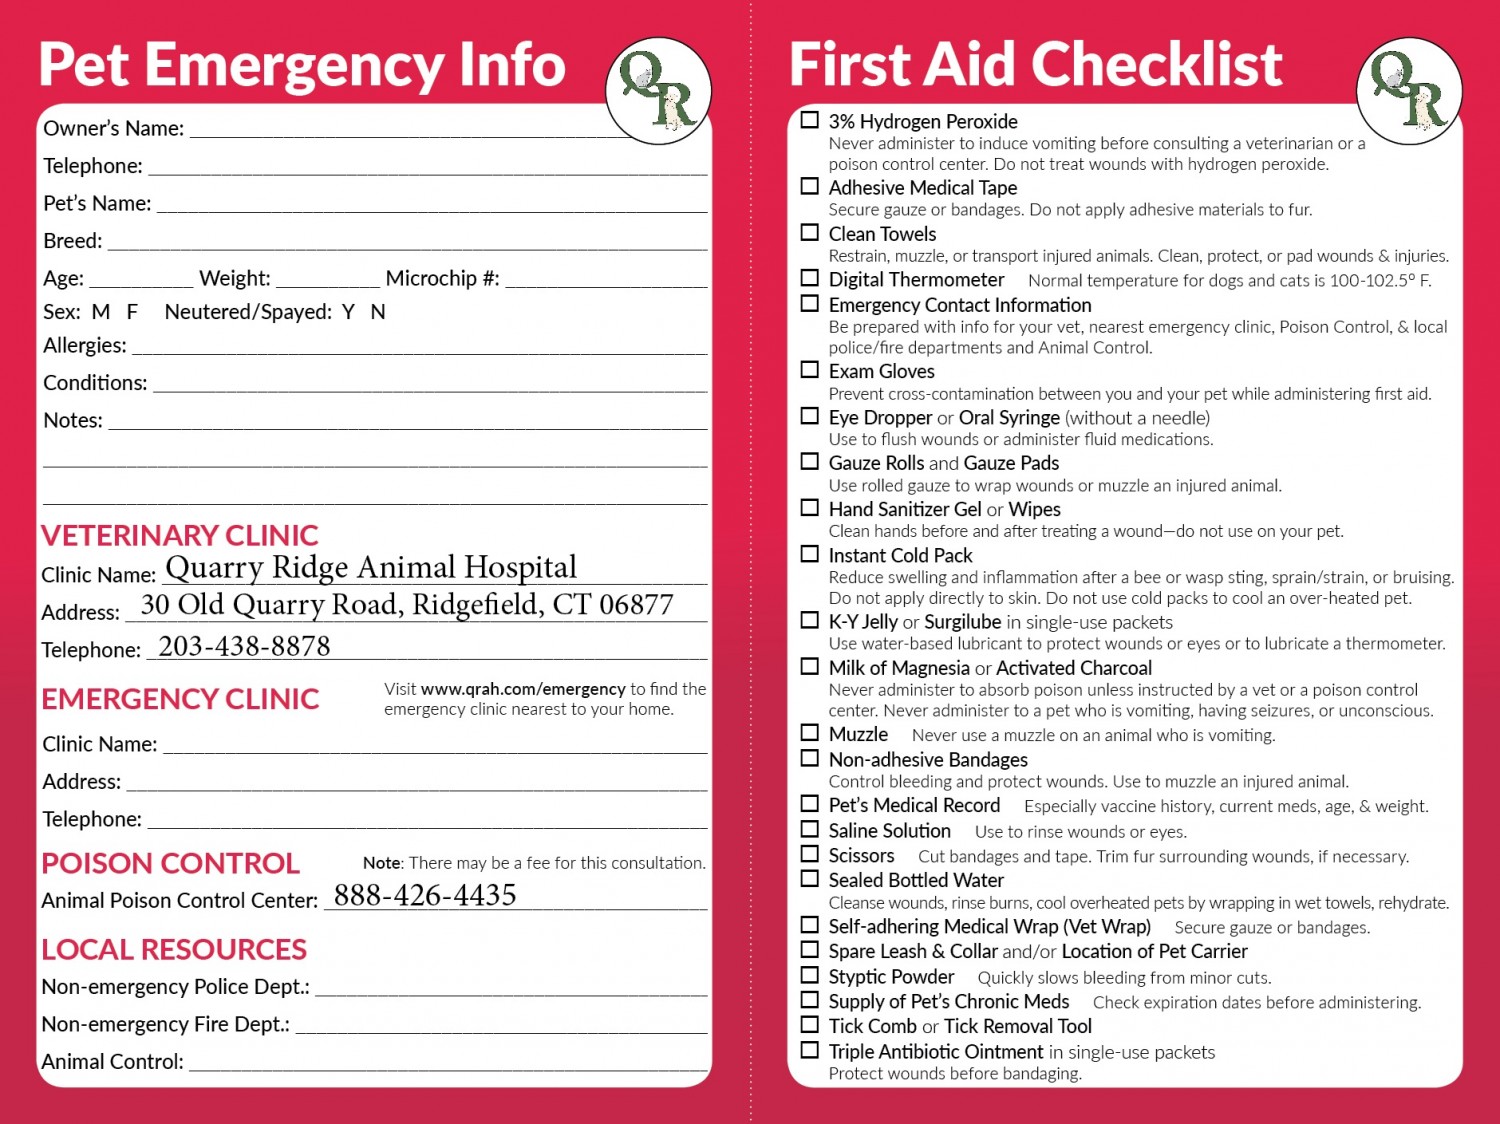 Pet Emergency Info Card and Pet First Aid Kit Checklist